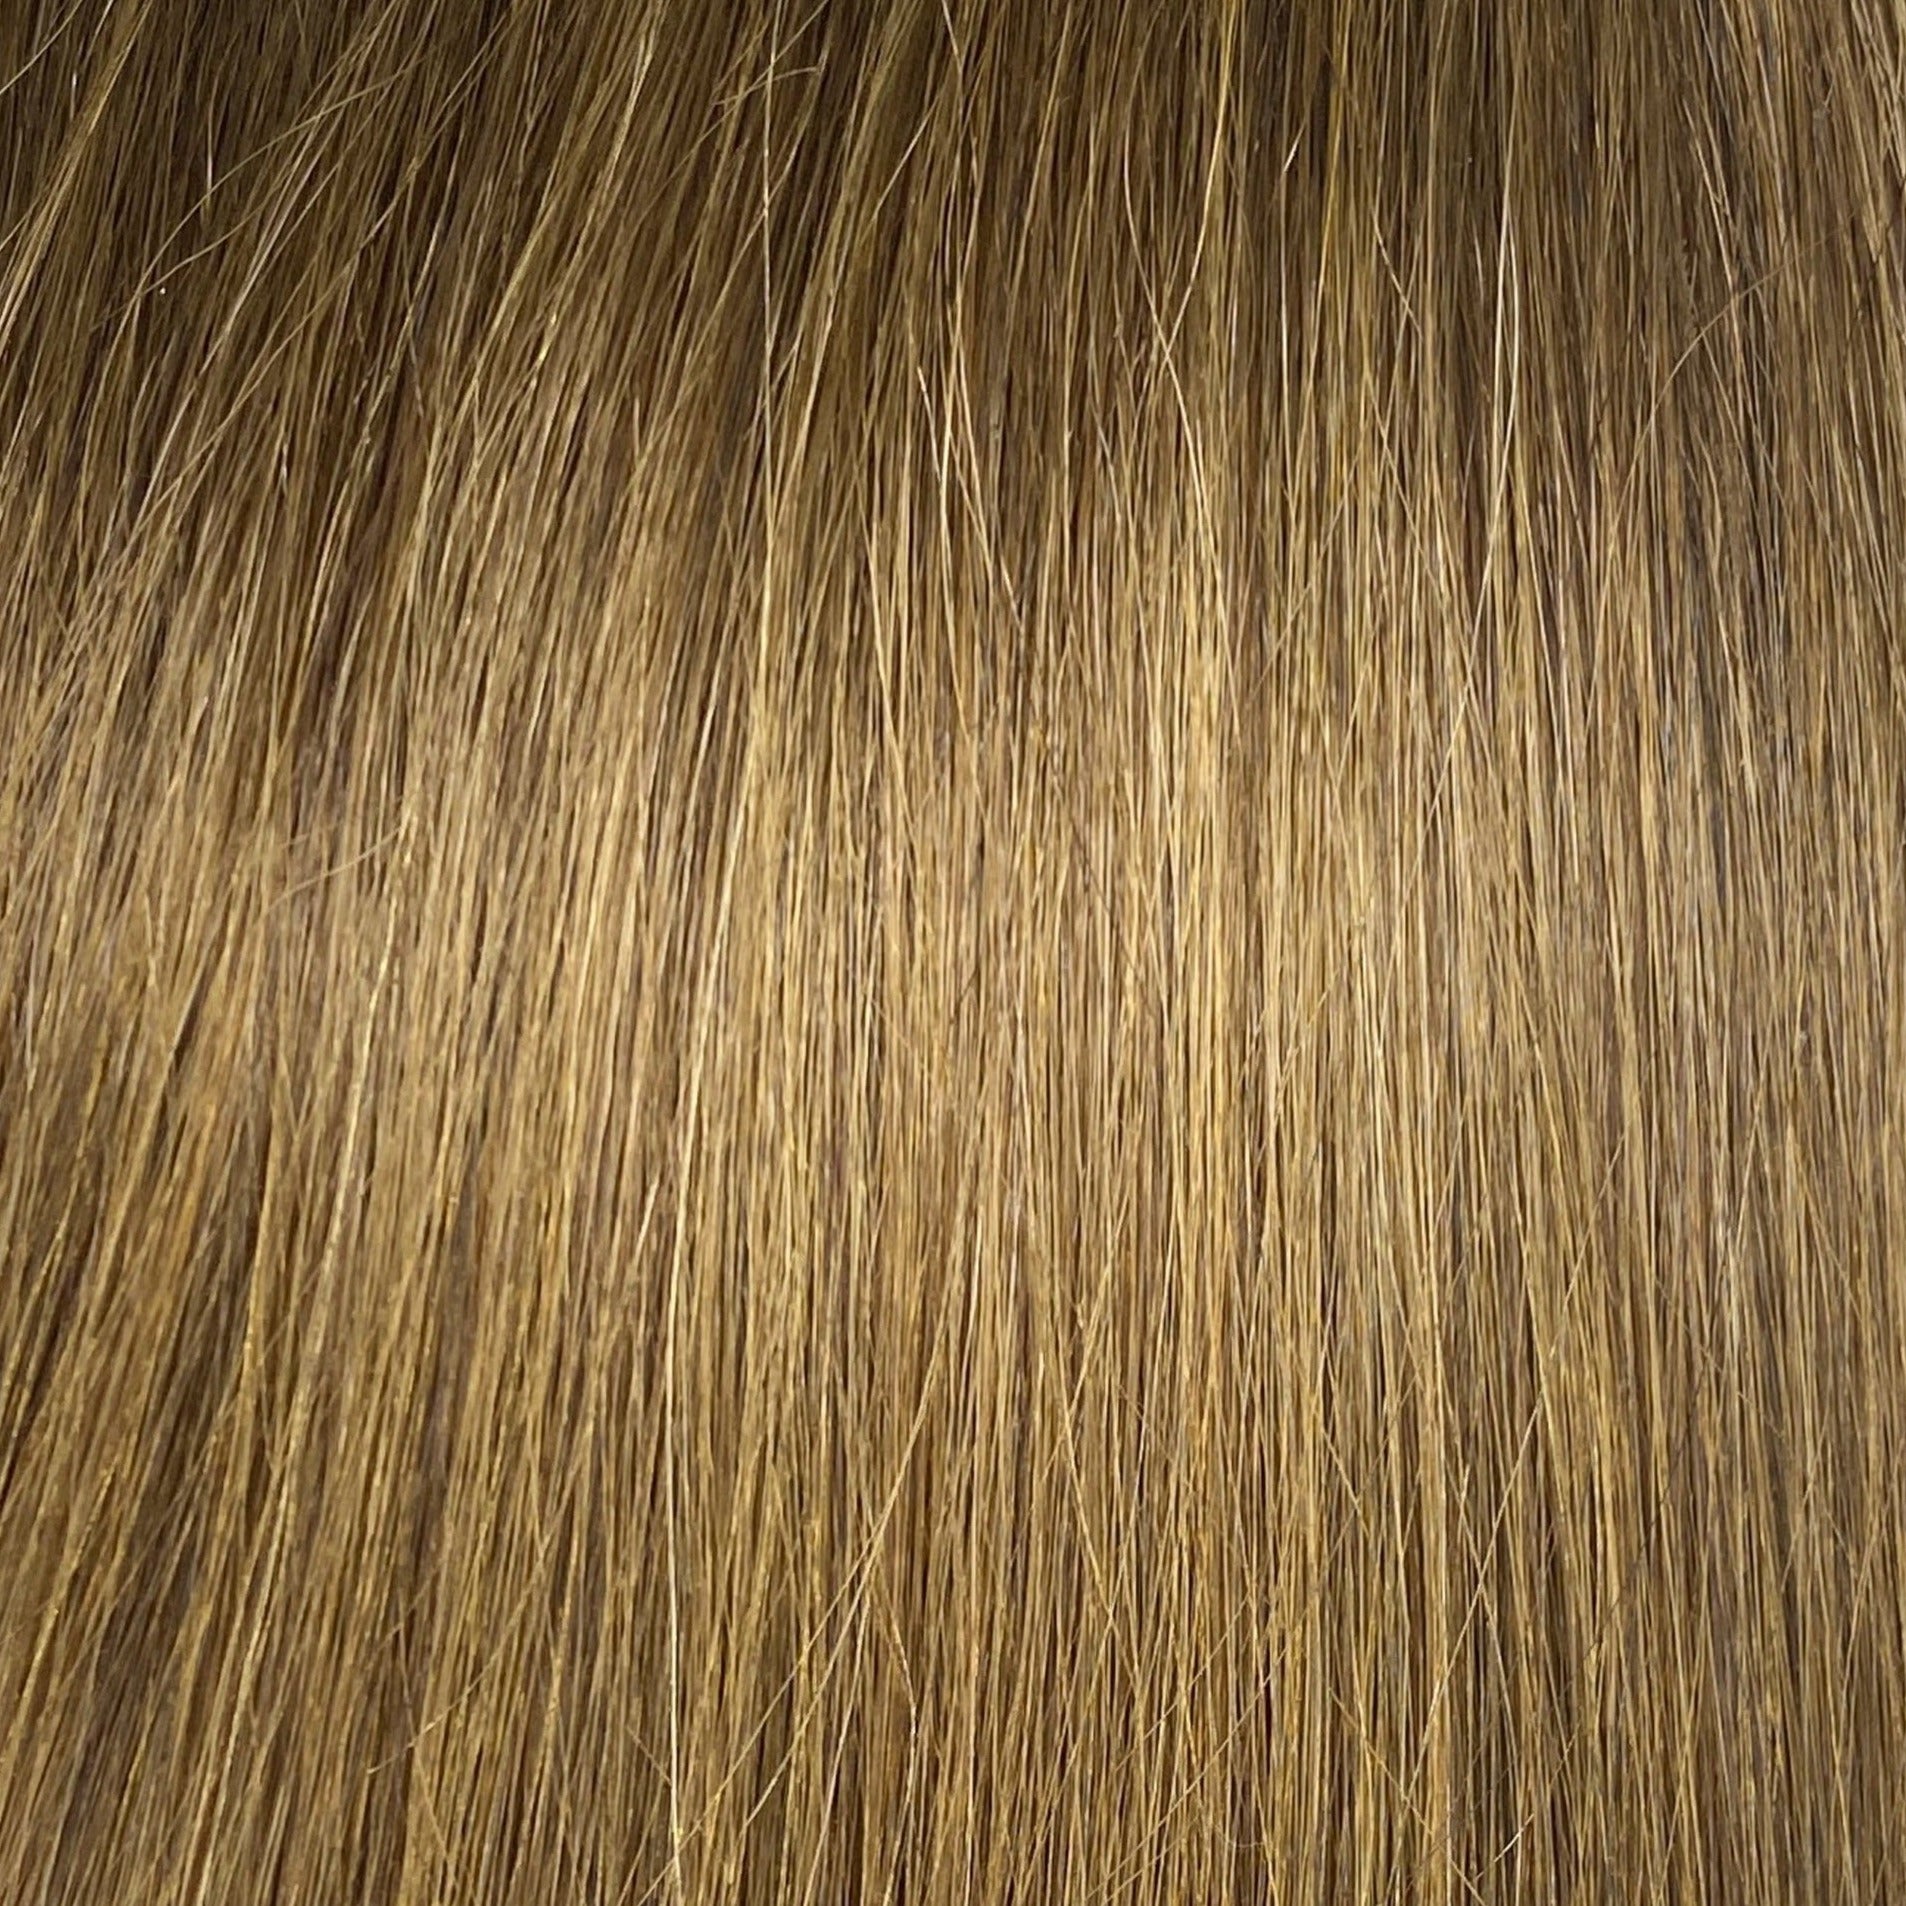 Velo Sale #2 - 16 inches - Chestnut - Image 1